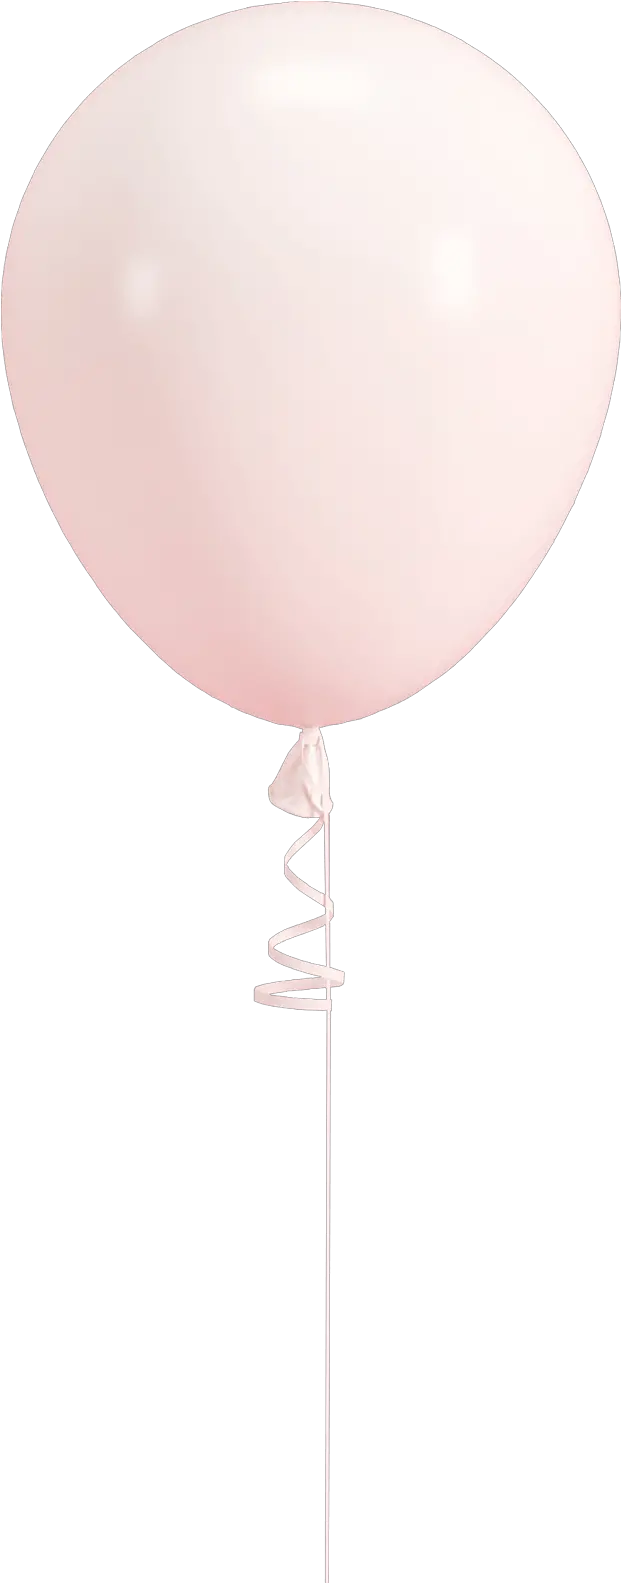 Home Just Peachy Balloon Png Ballons Icon Party